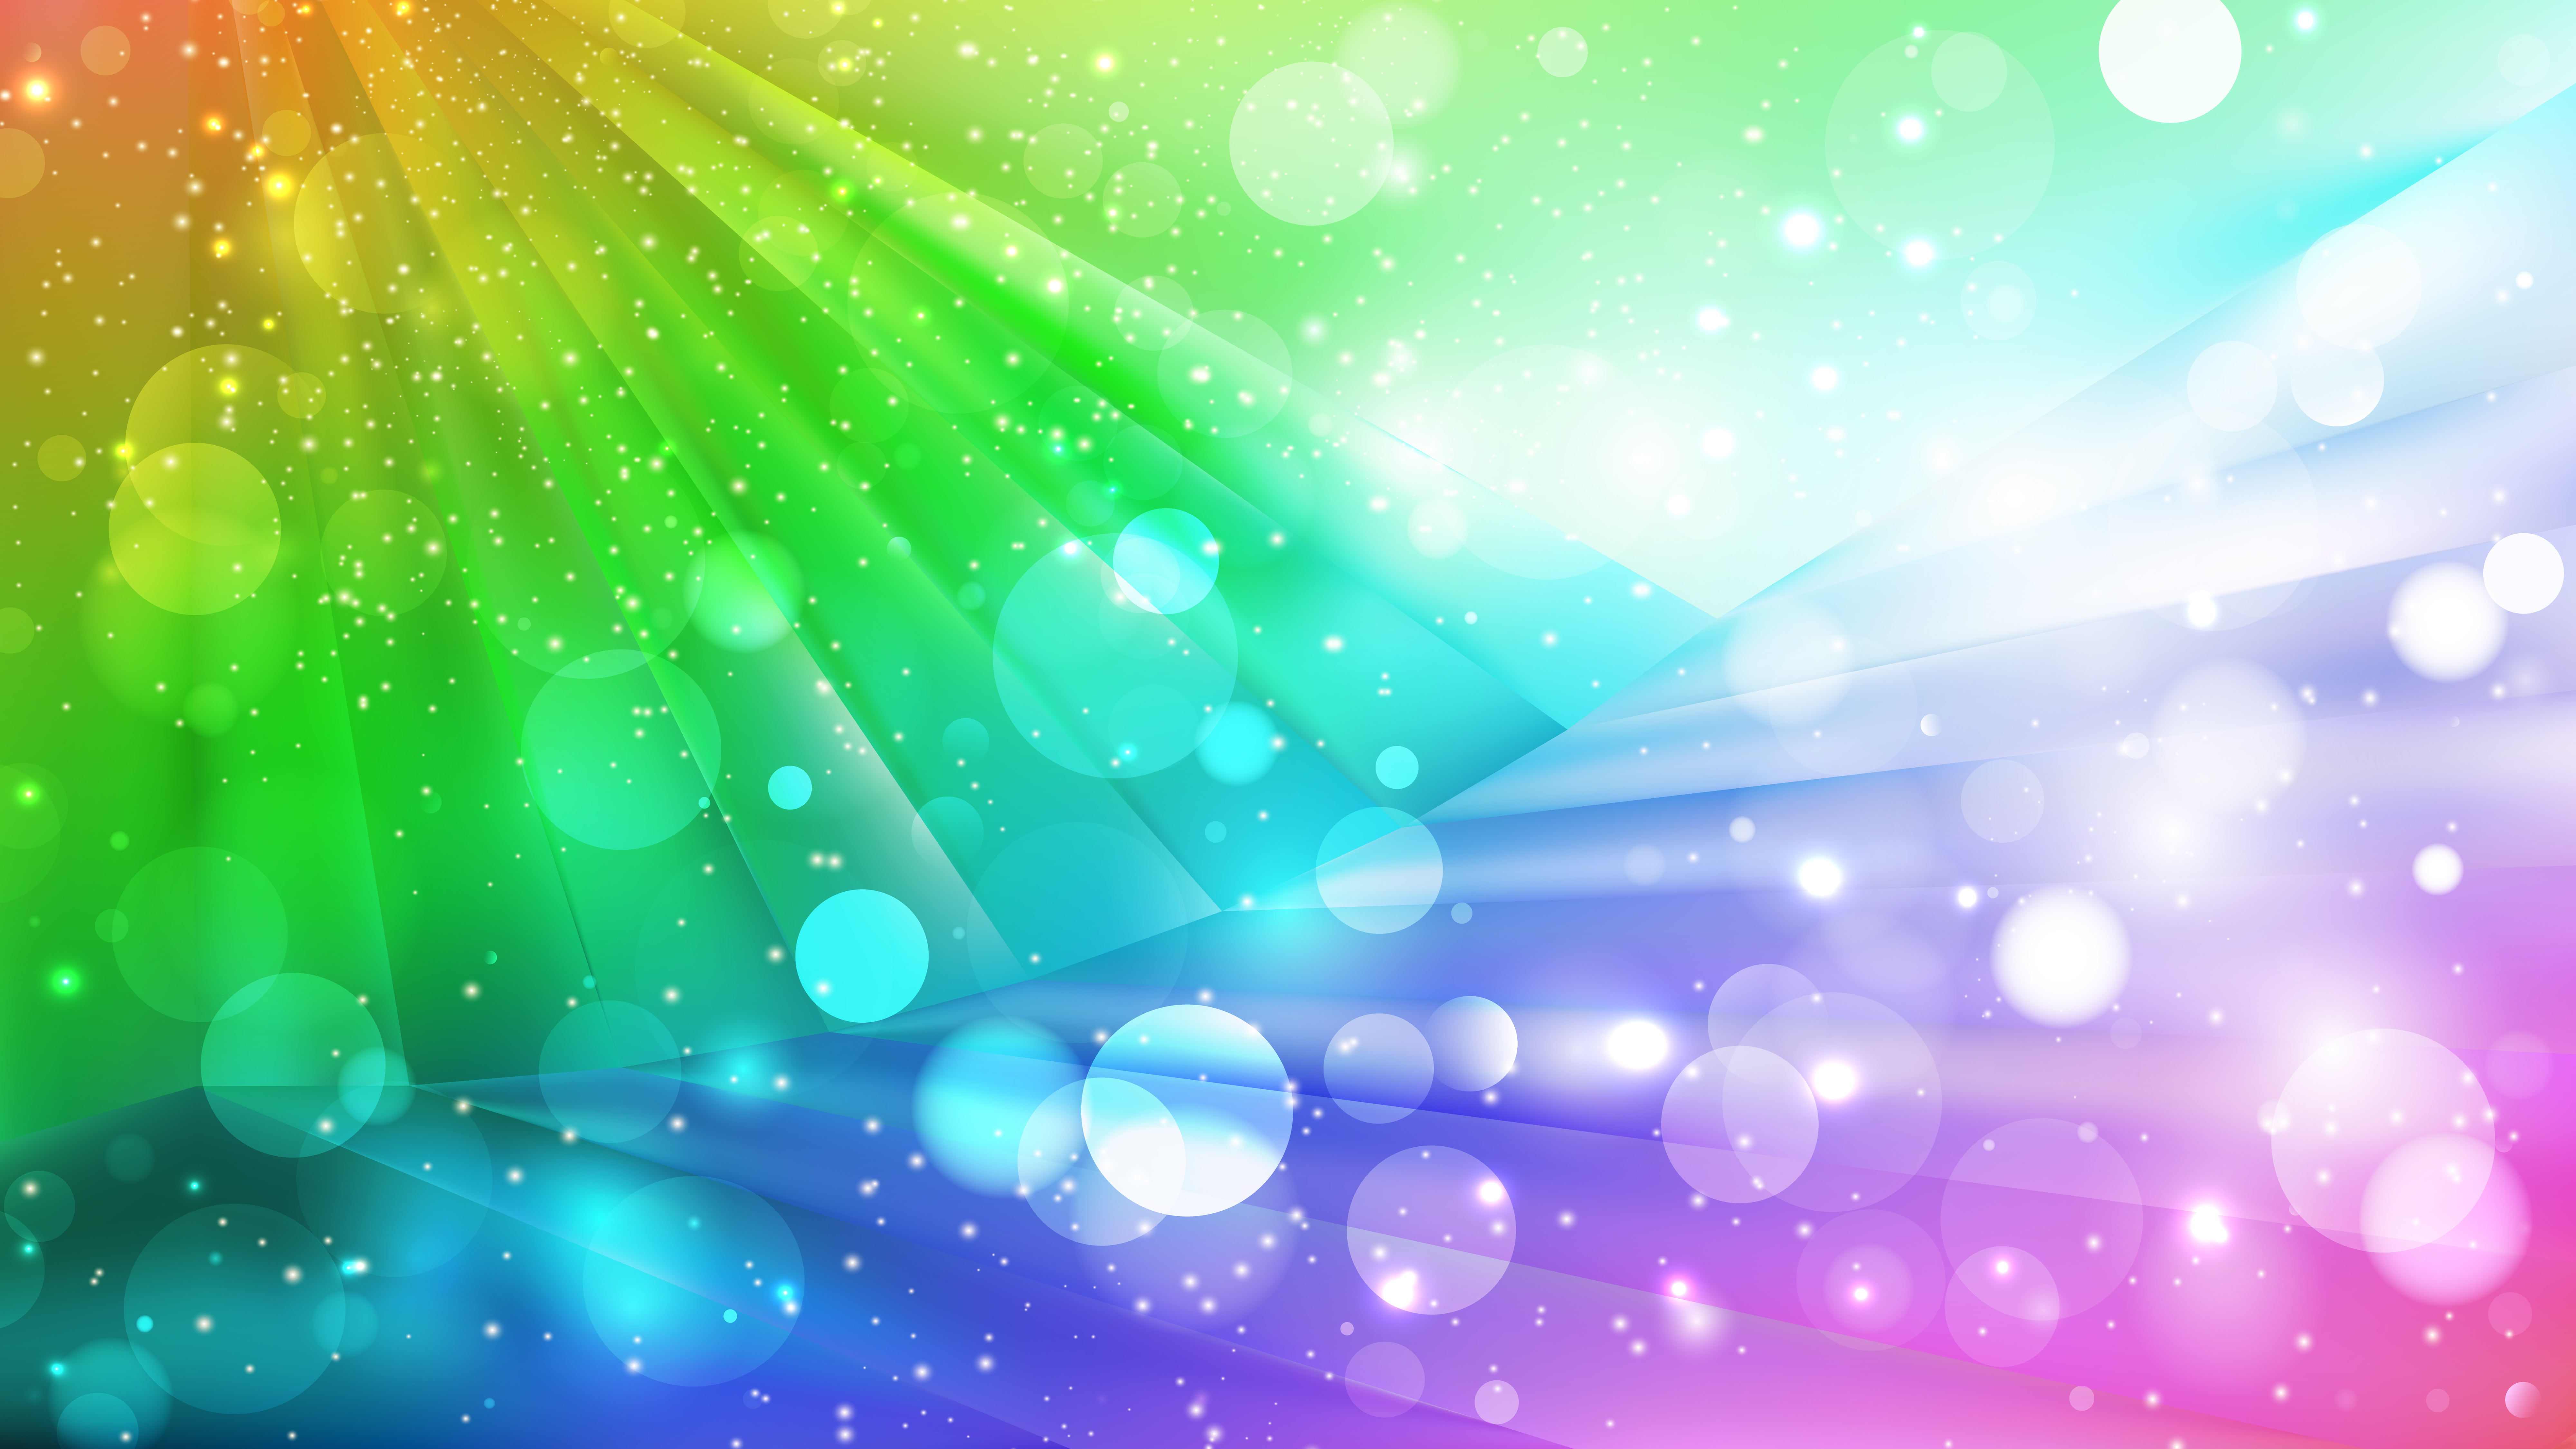 Free Abstract Colorful Defocused Lights Background Design